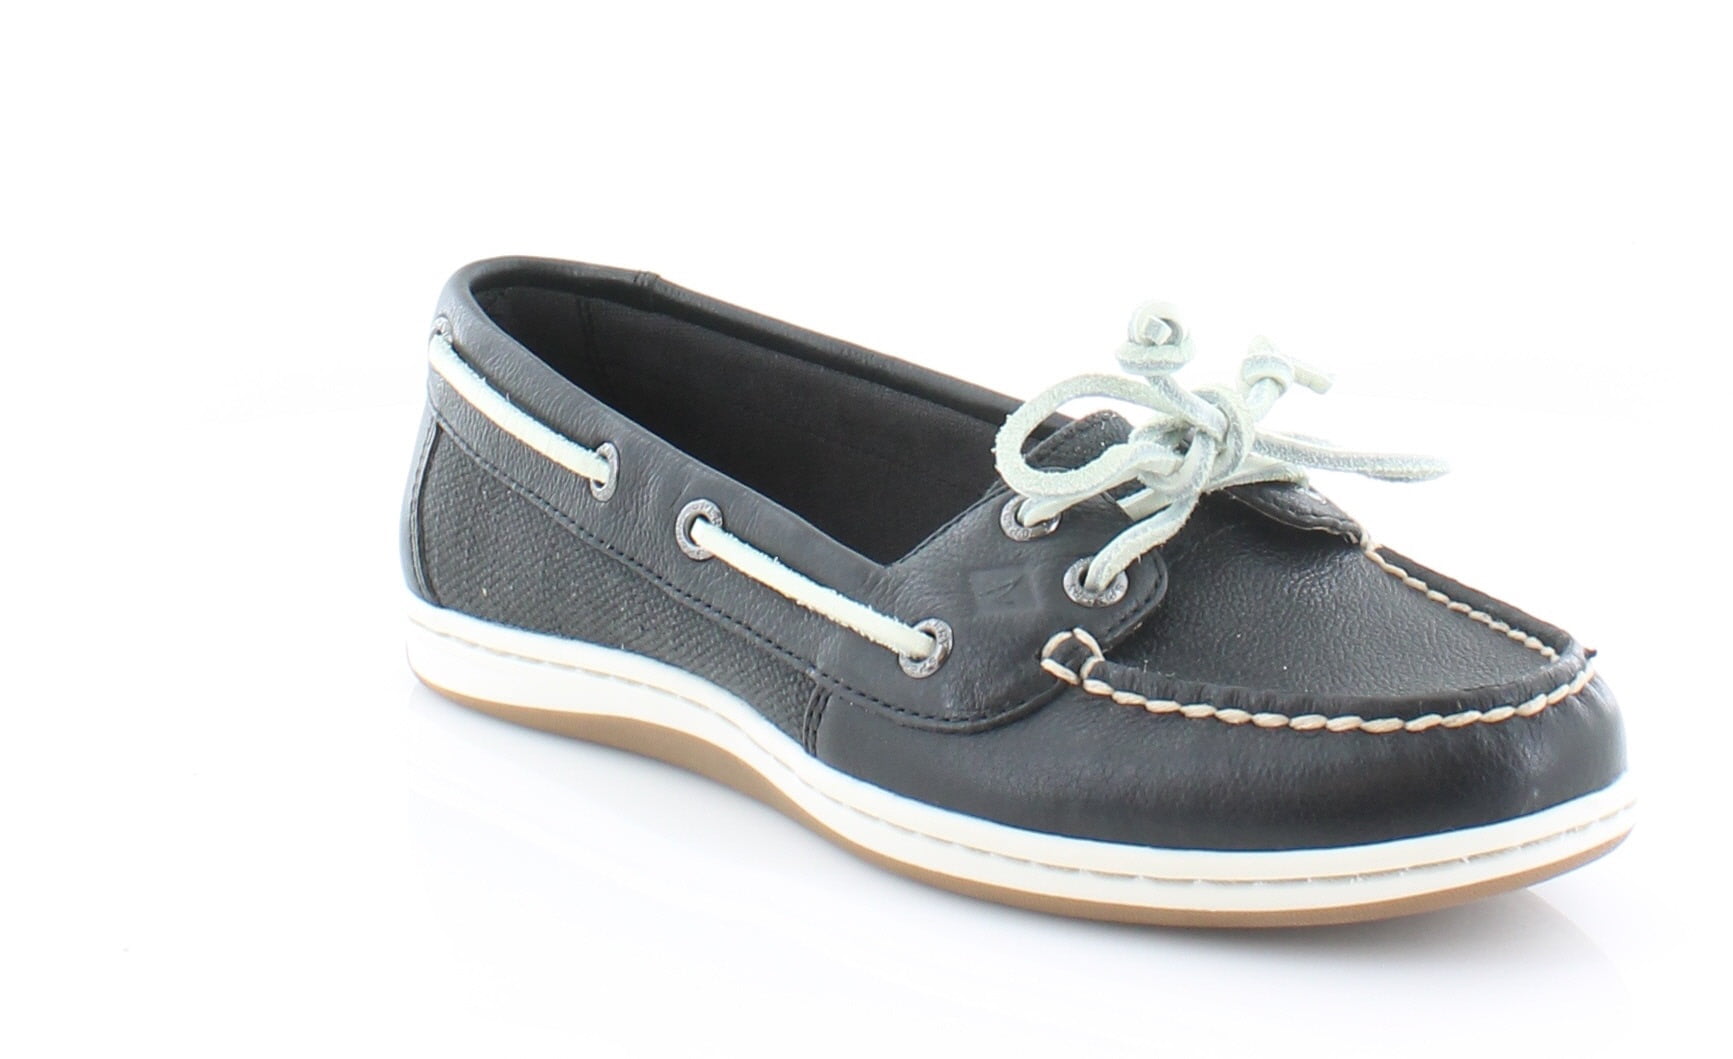 Sperry Top-Sider Womens Firefish Core